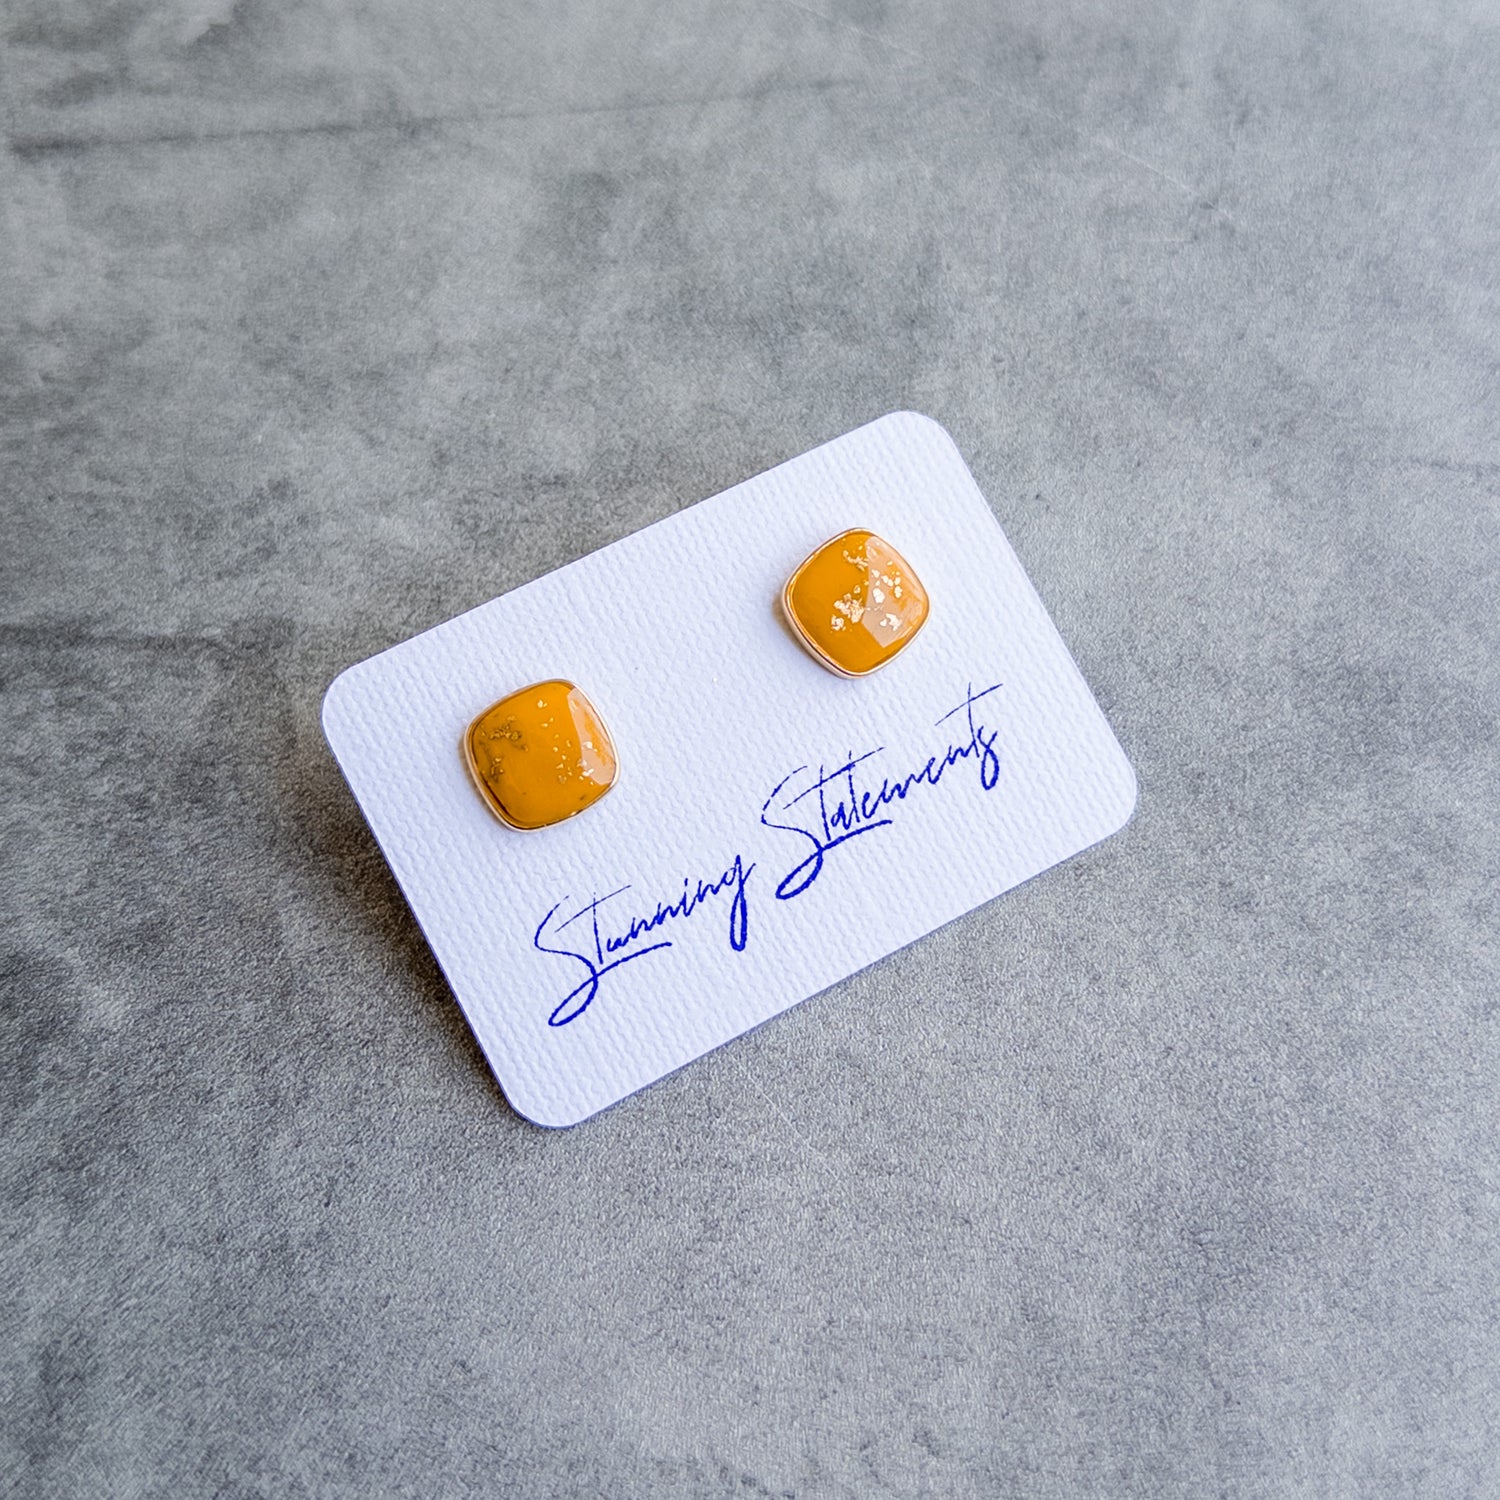 stunning statements office work professional simple square clay yellow juliette stud earrings